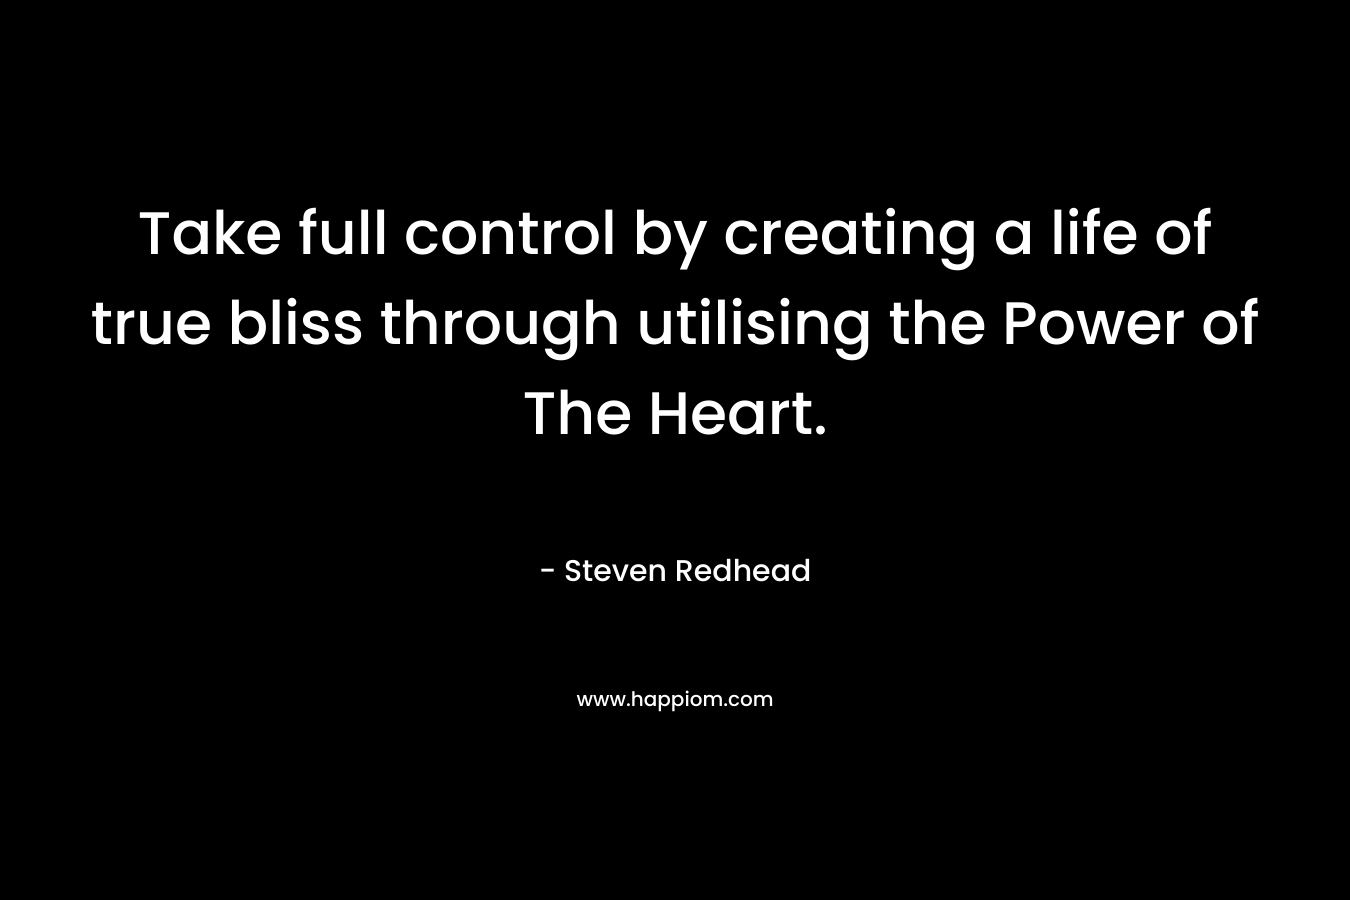 Take full control by creating a life of true bliss through utilising the Power of The Heart. – Steven Redhead